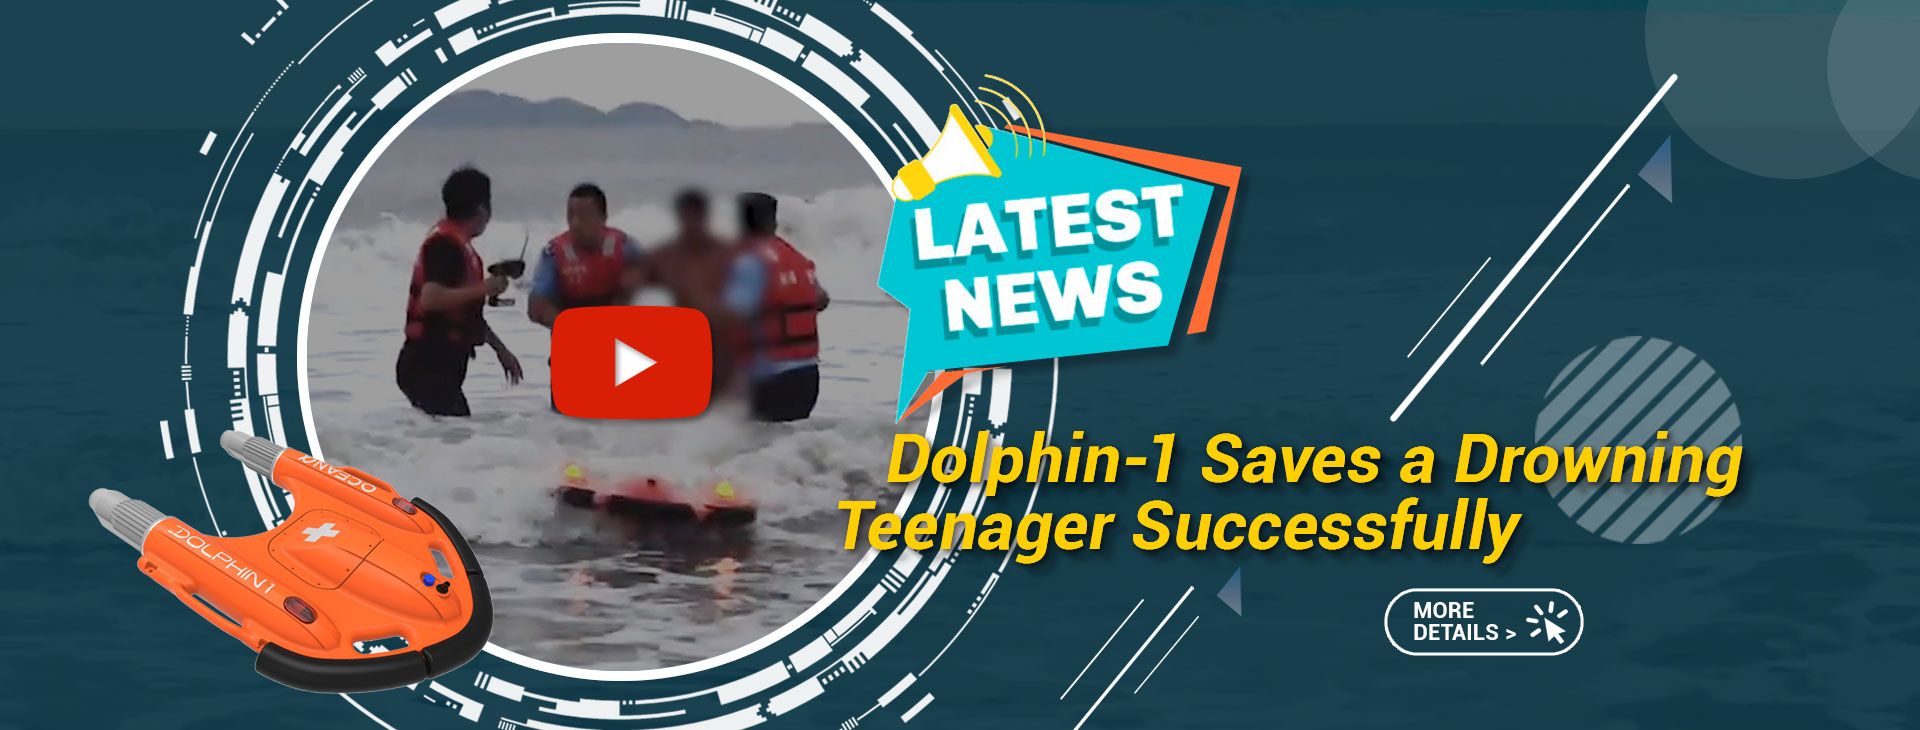 Web Banner Dolphin1 Save 02